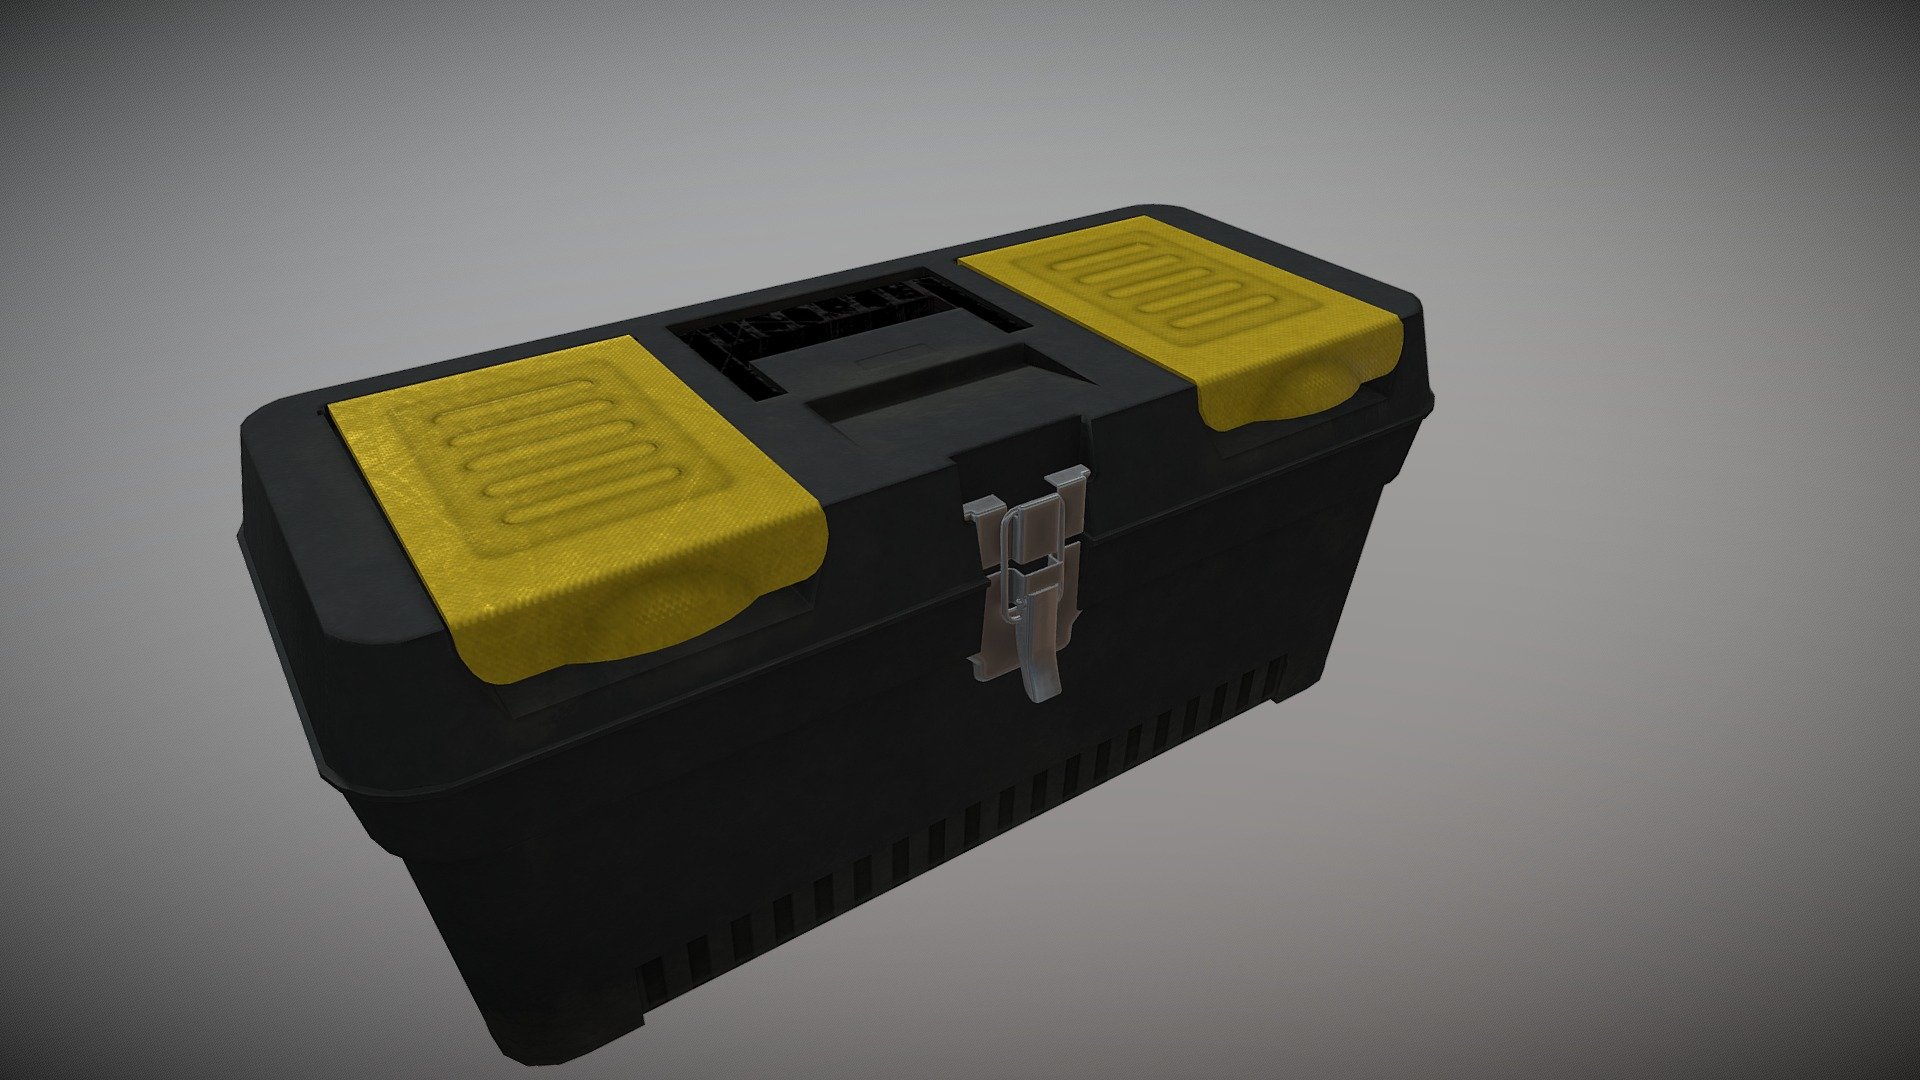 Tool box for instrument low-poly pbr textures - Tool box for instrument - 3D model by URAL COMPUTER GRAPHICS (@nikita174rus) 3d model